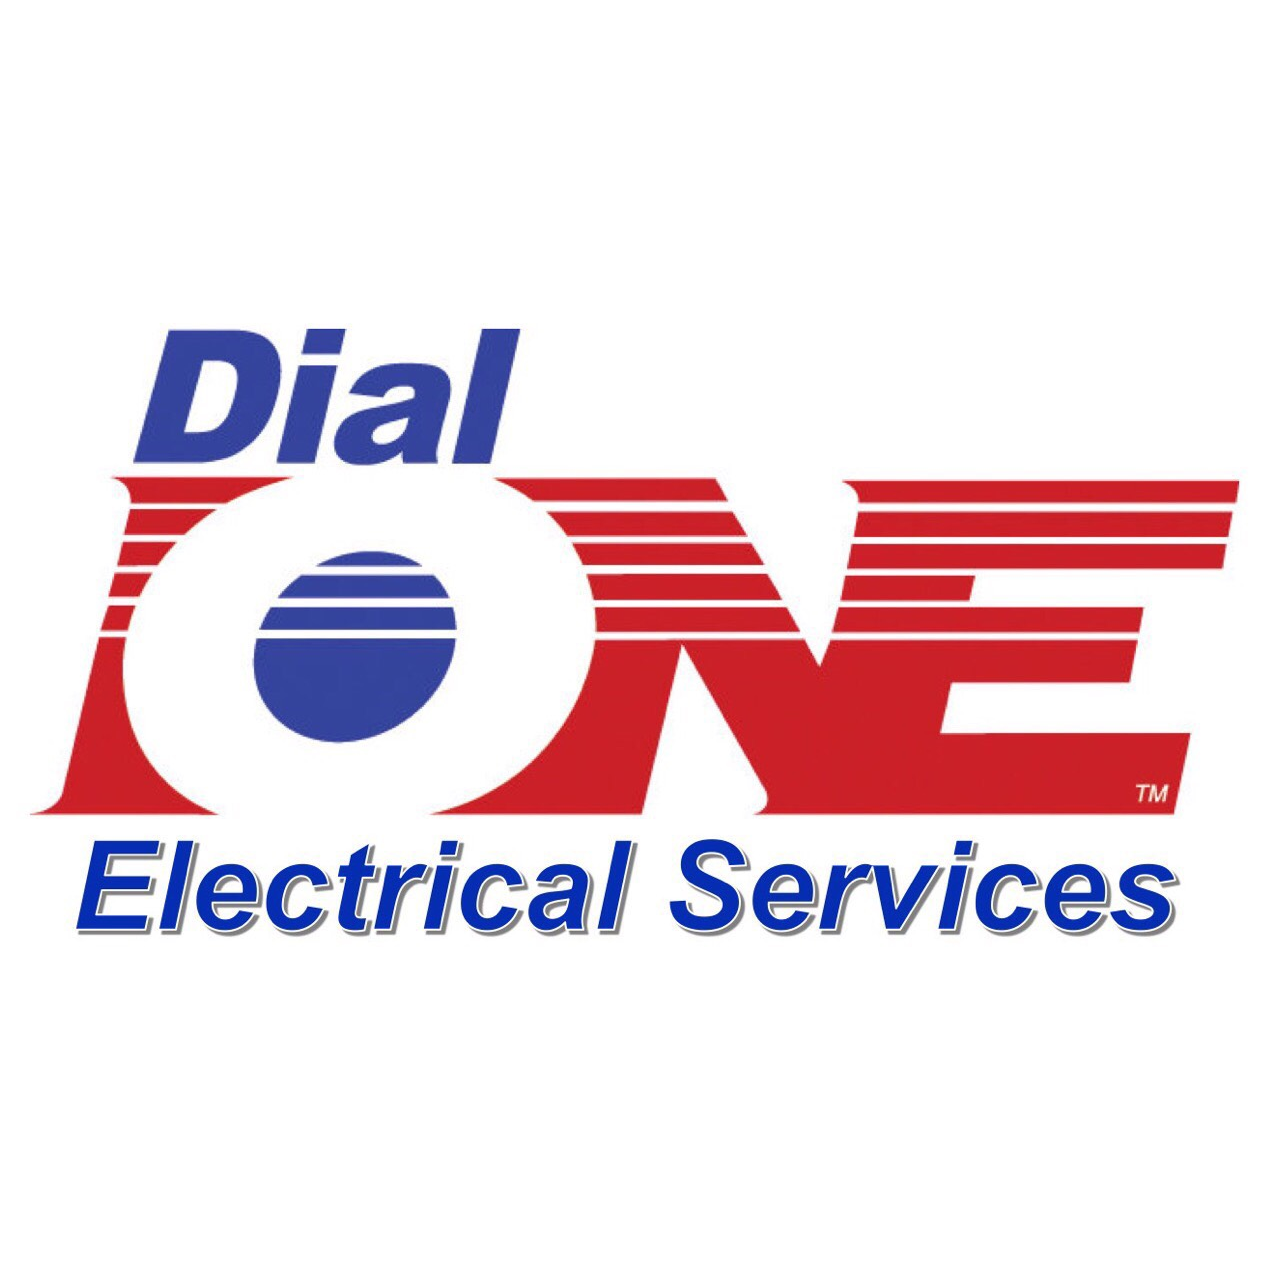 Dial One Electrical Services - Austin, TX 78753-2145 - (512)371-0001 | ShowMeLocal.com